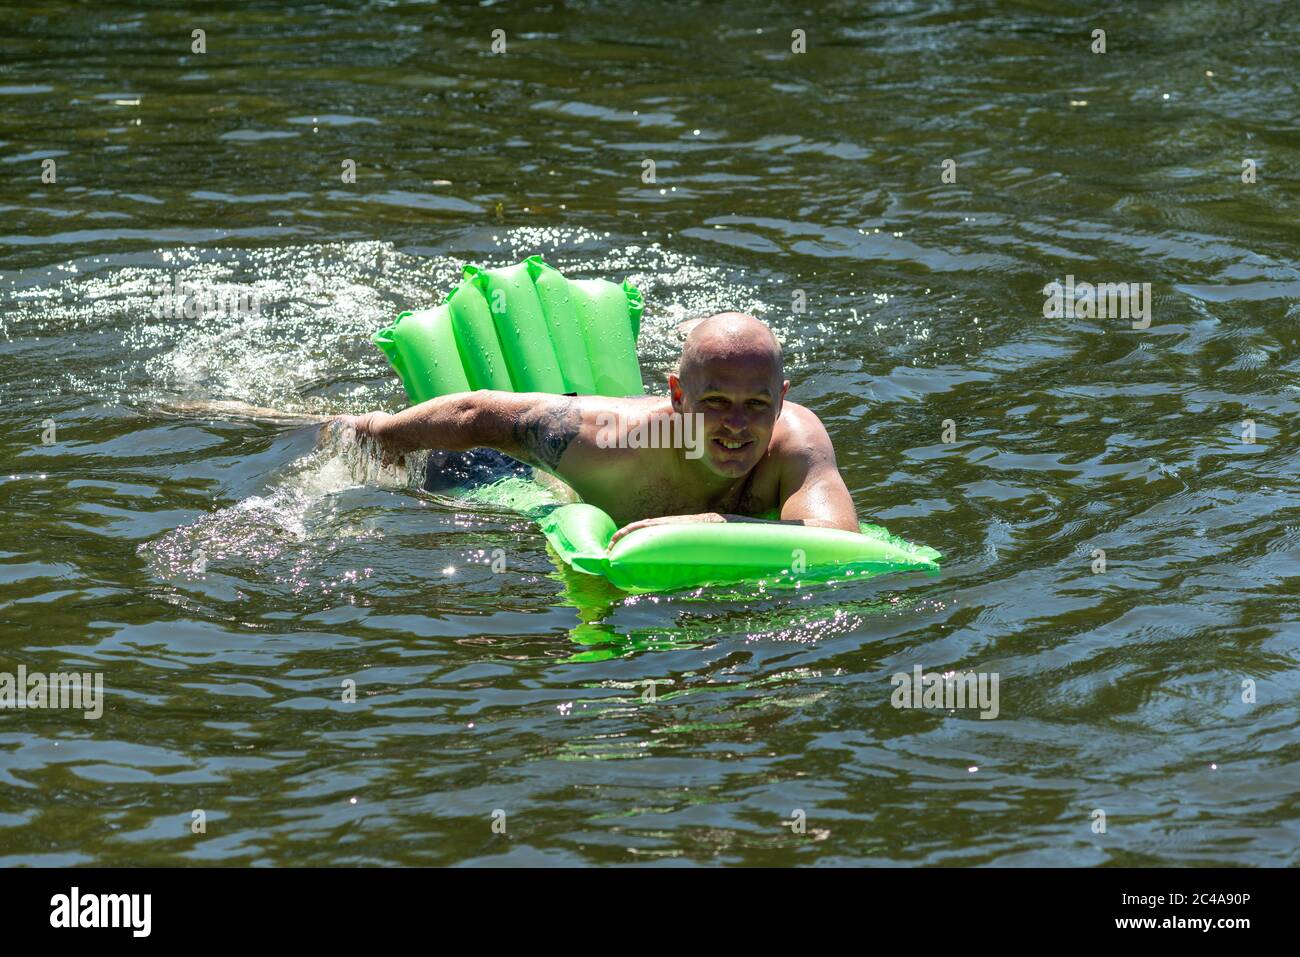 Man on a lilo swimming in the River Avon cooling off in the cold water. Mid-summer heatwave making it the hottest day with the highest UV levels so far this year and the temperature at around 33 degrees in the afternoon. Fordingbridge, New Forest, Hampshire, England, UK, 25th June 2020. Stock Photo